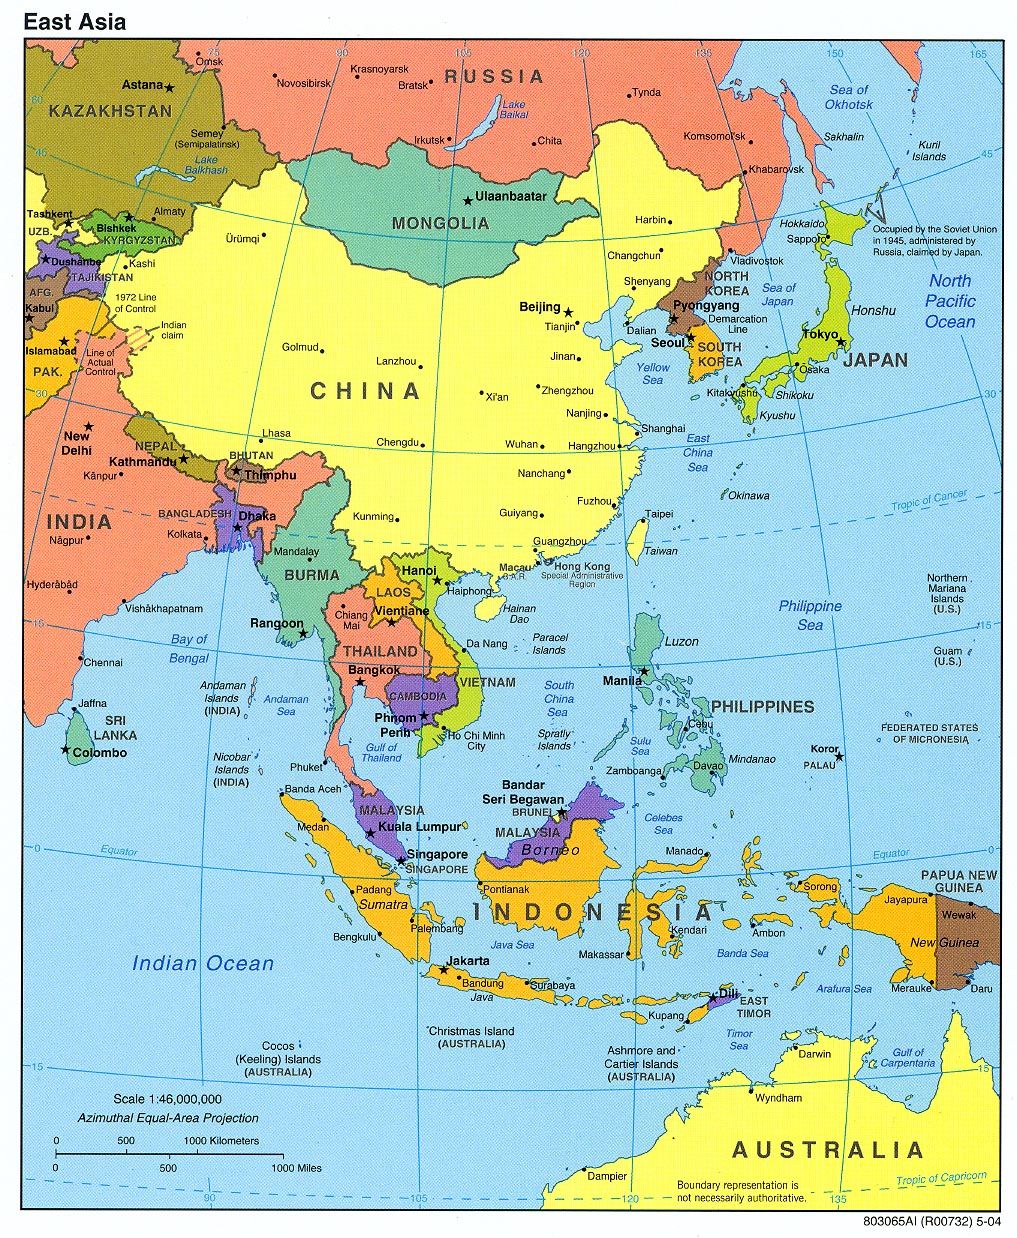 Maps Asia Pacific Region Ideas. Map, Asia Map, Asia